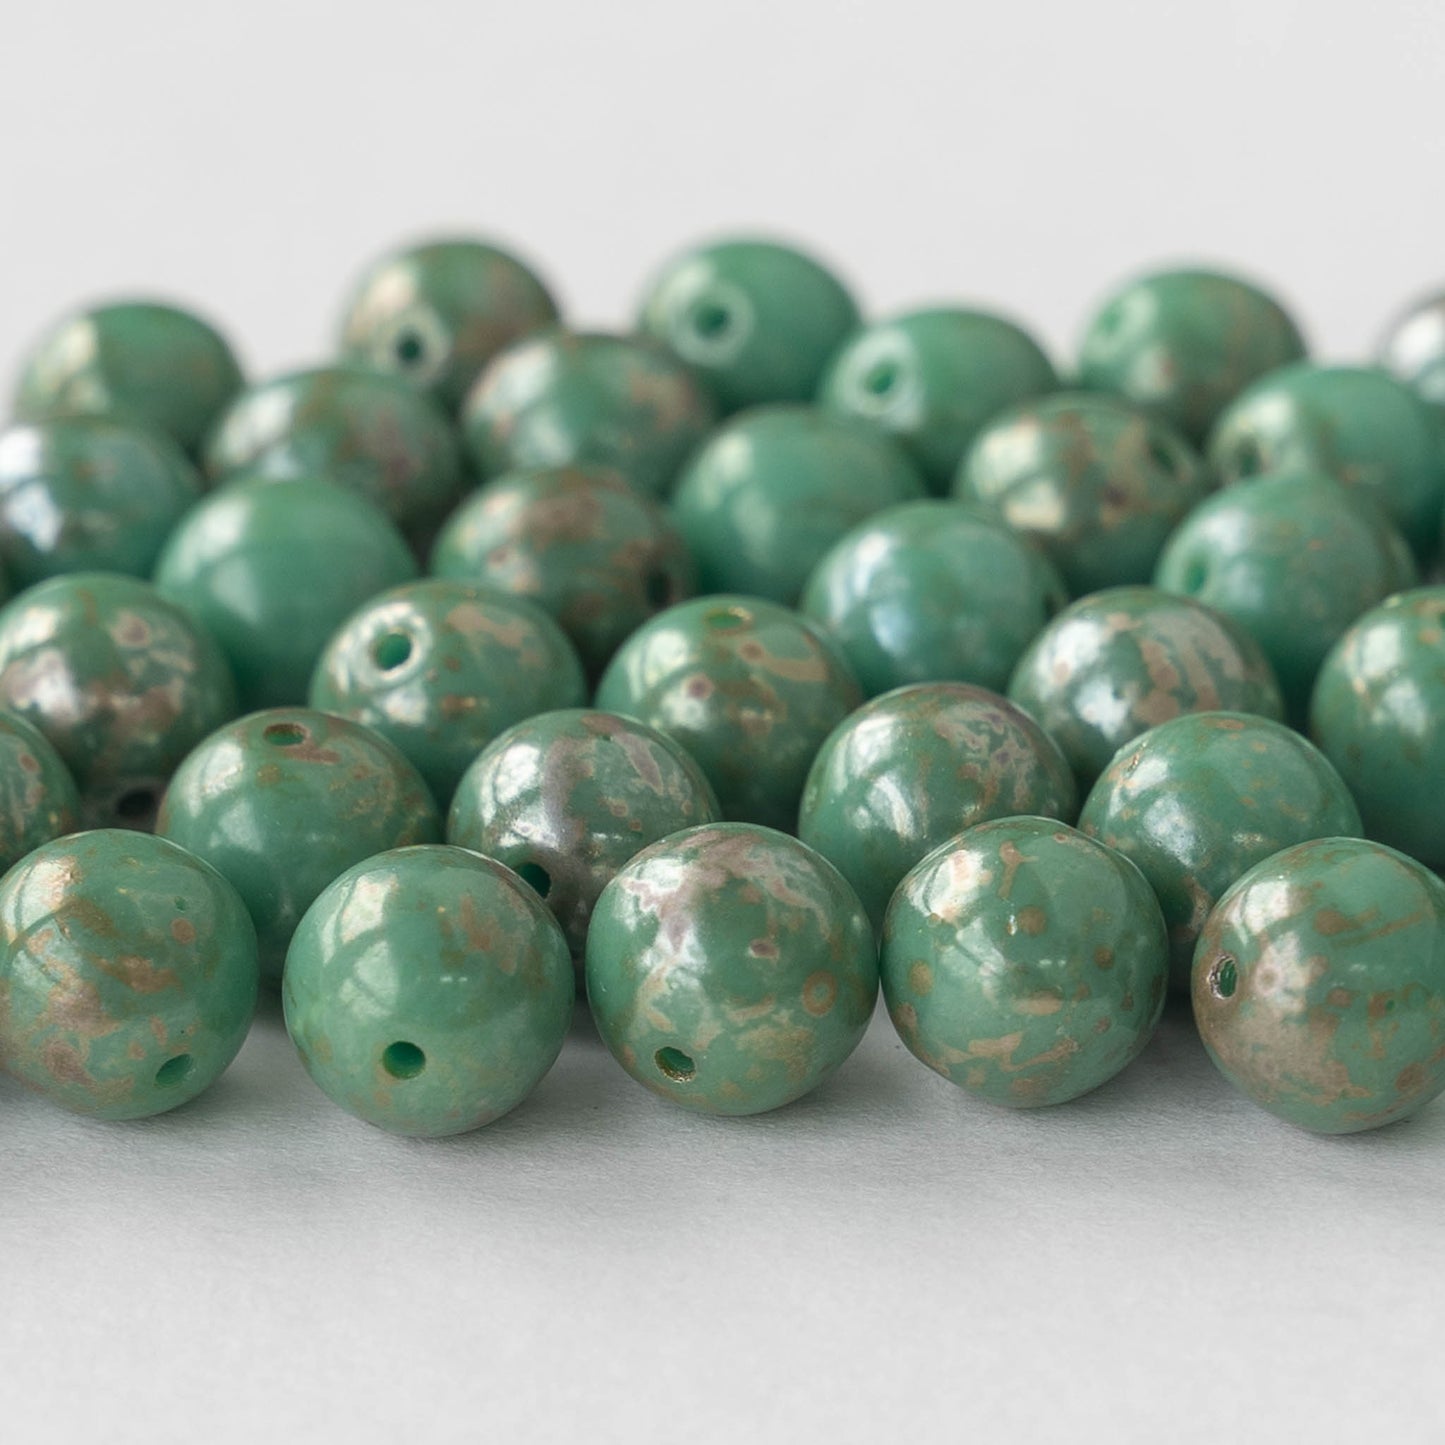 8mm Round Glass Beads - Opaque Turquoise Picasso - 20 Beads